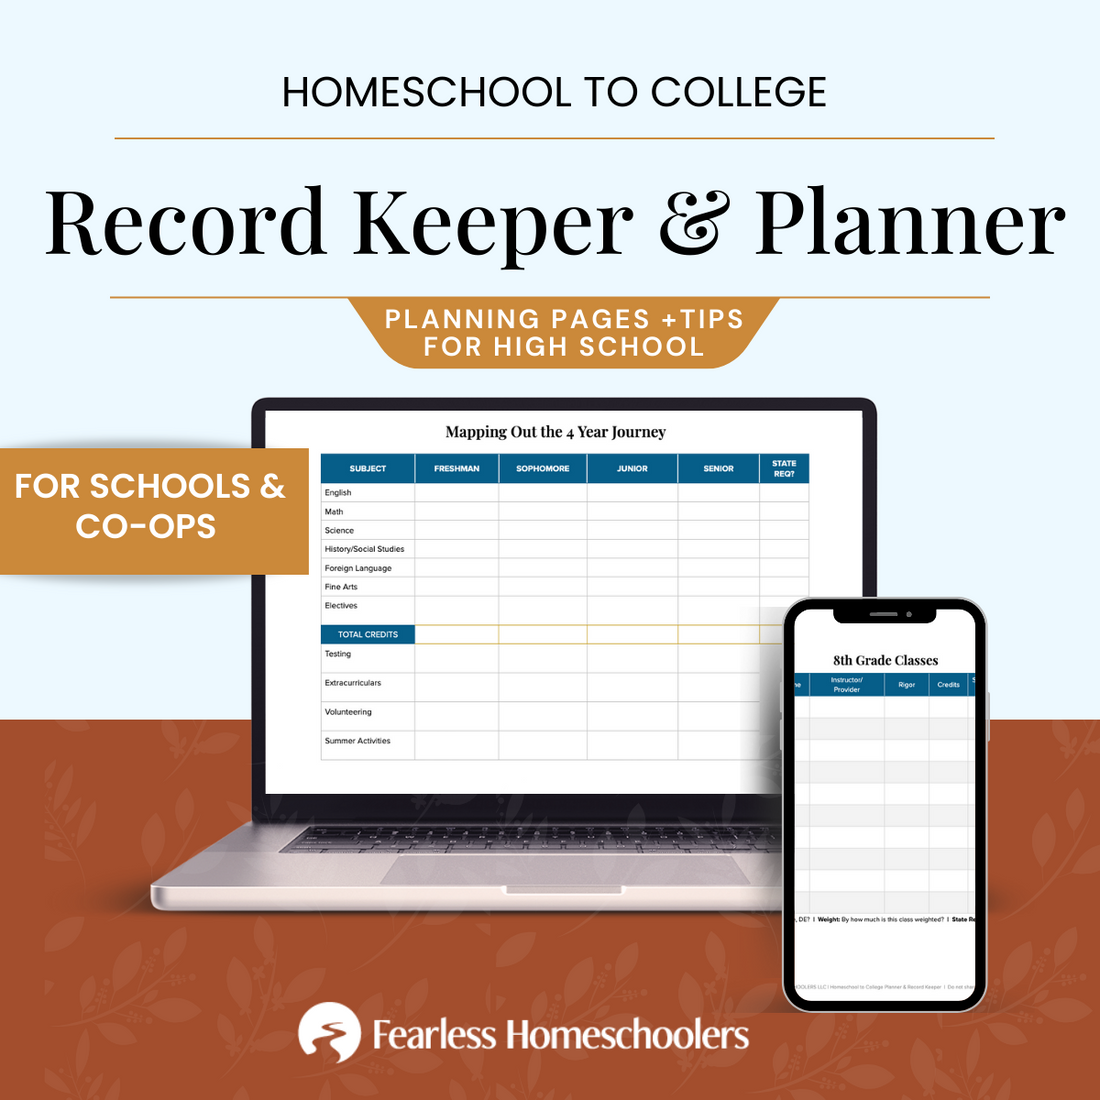 Homeschool Homeschool Record Keeper &amp; Planner for Co-ops